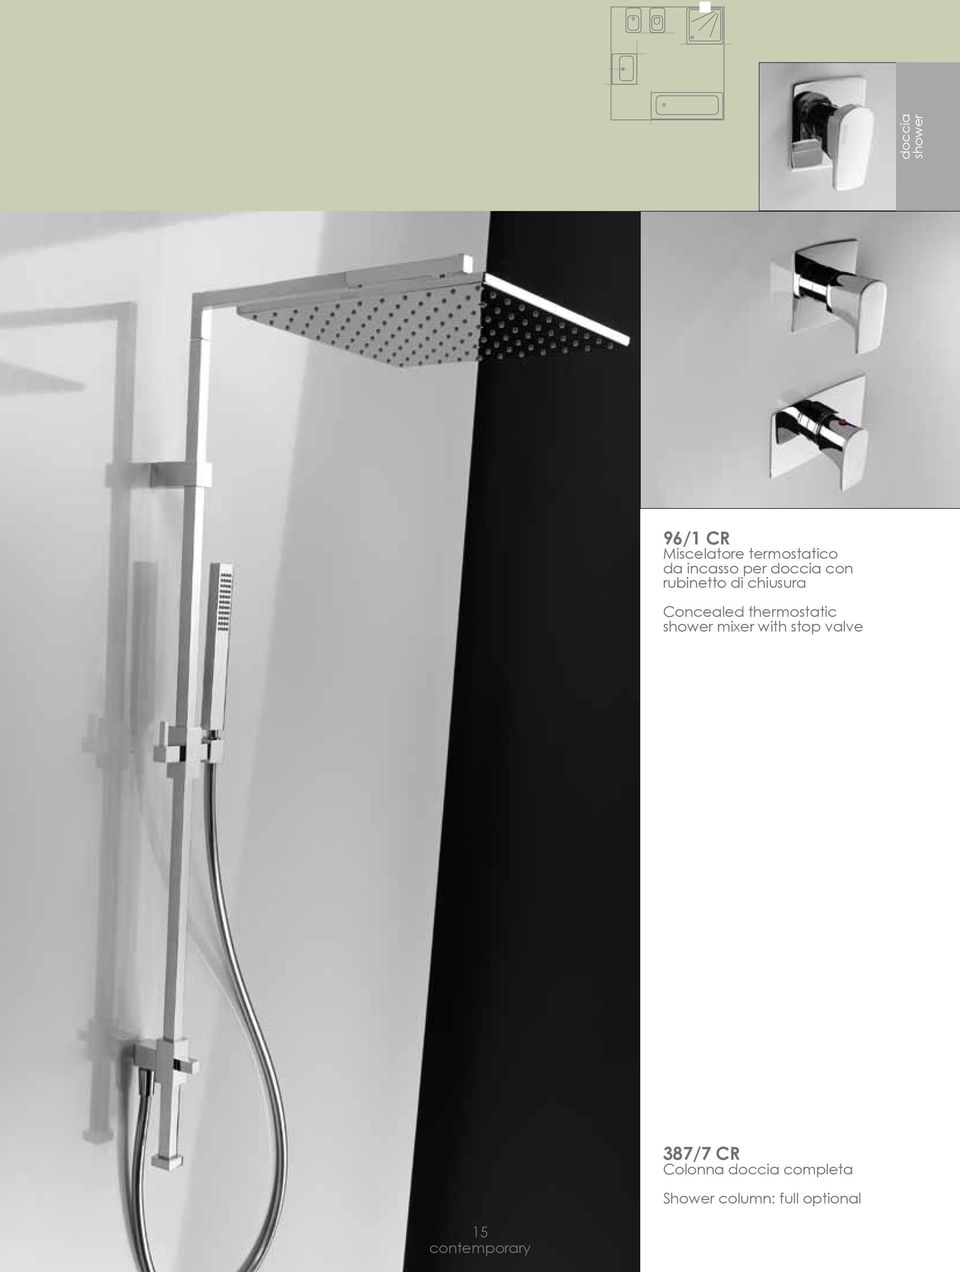 Concealed thermostatic shower mixer with stop valve